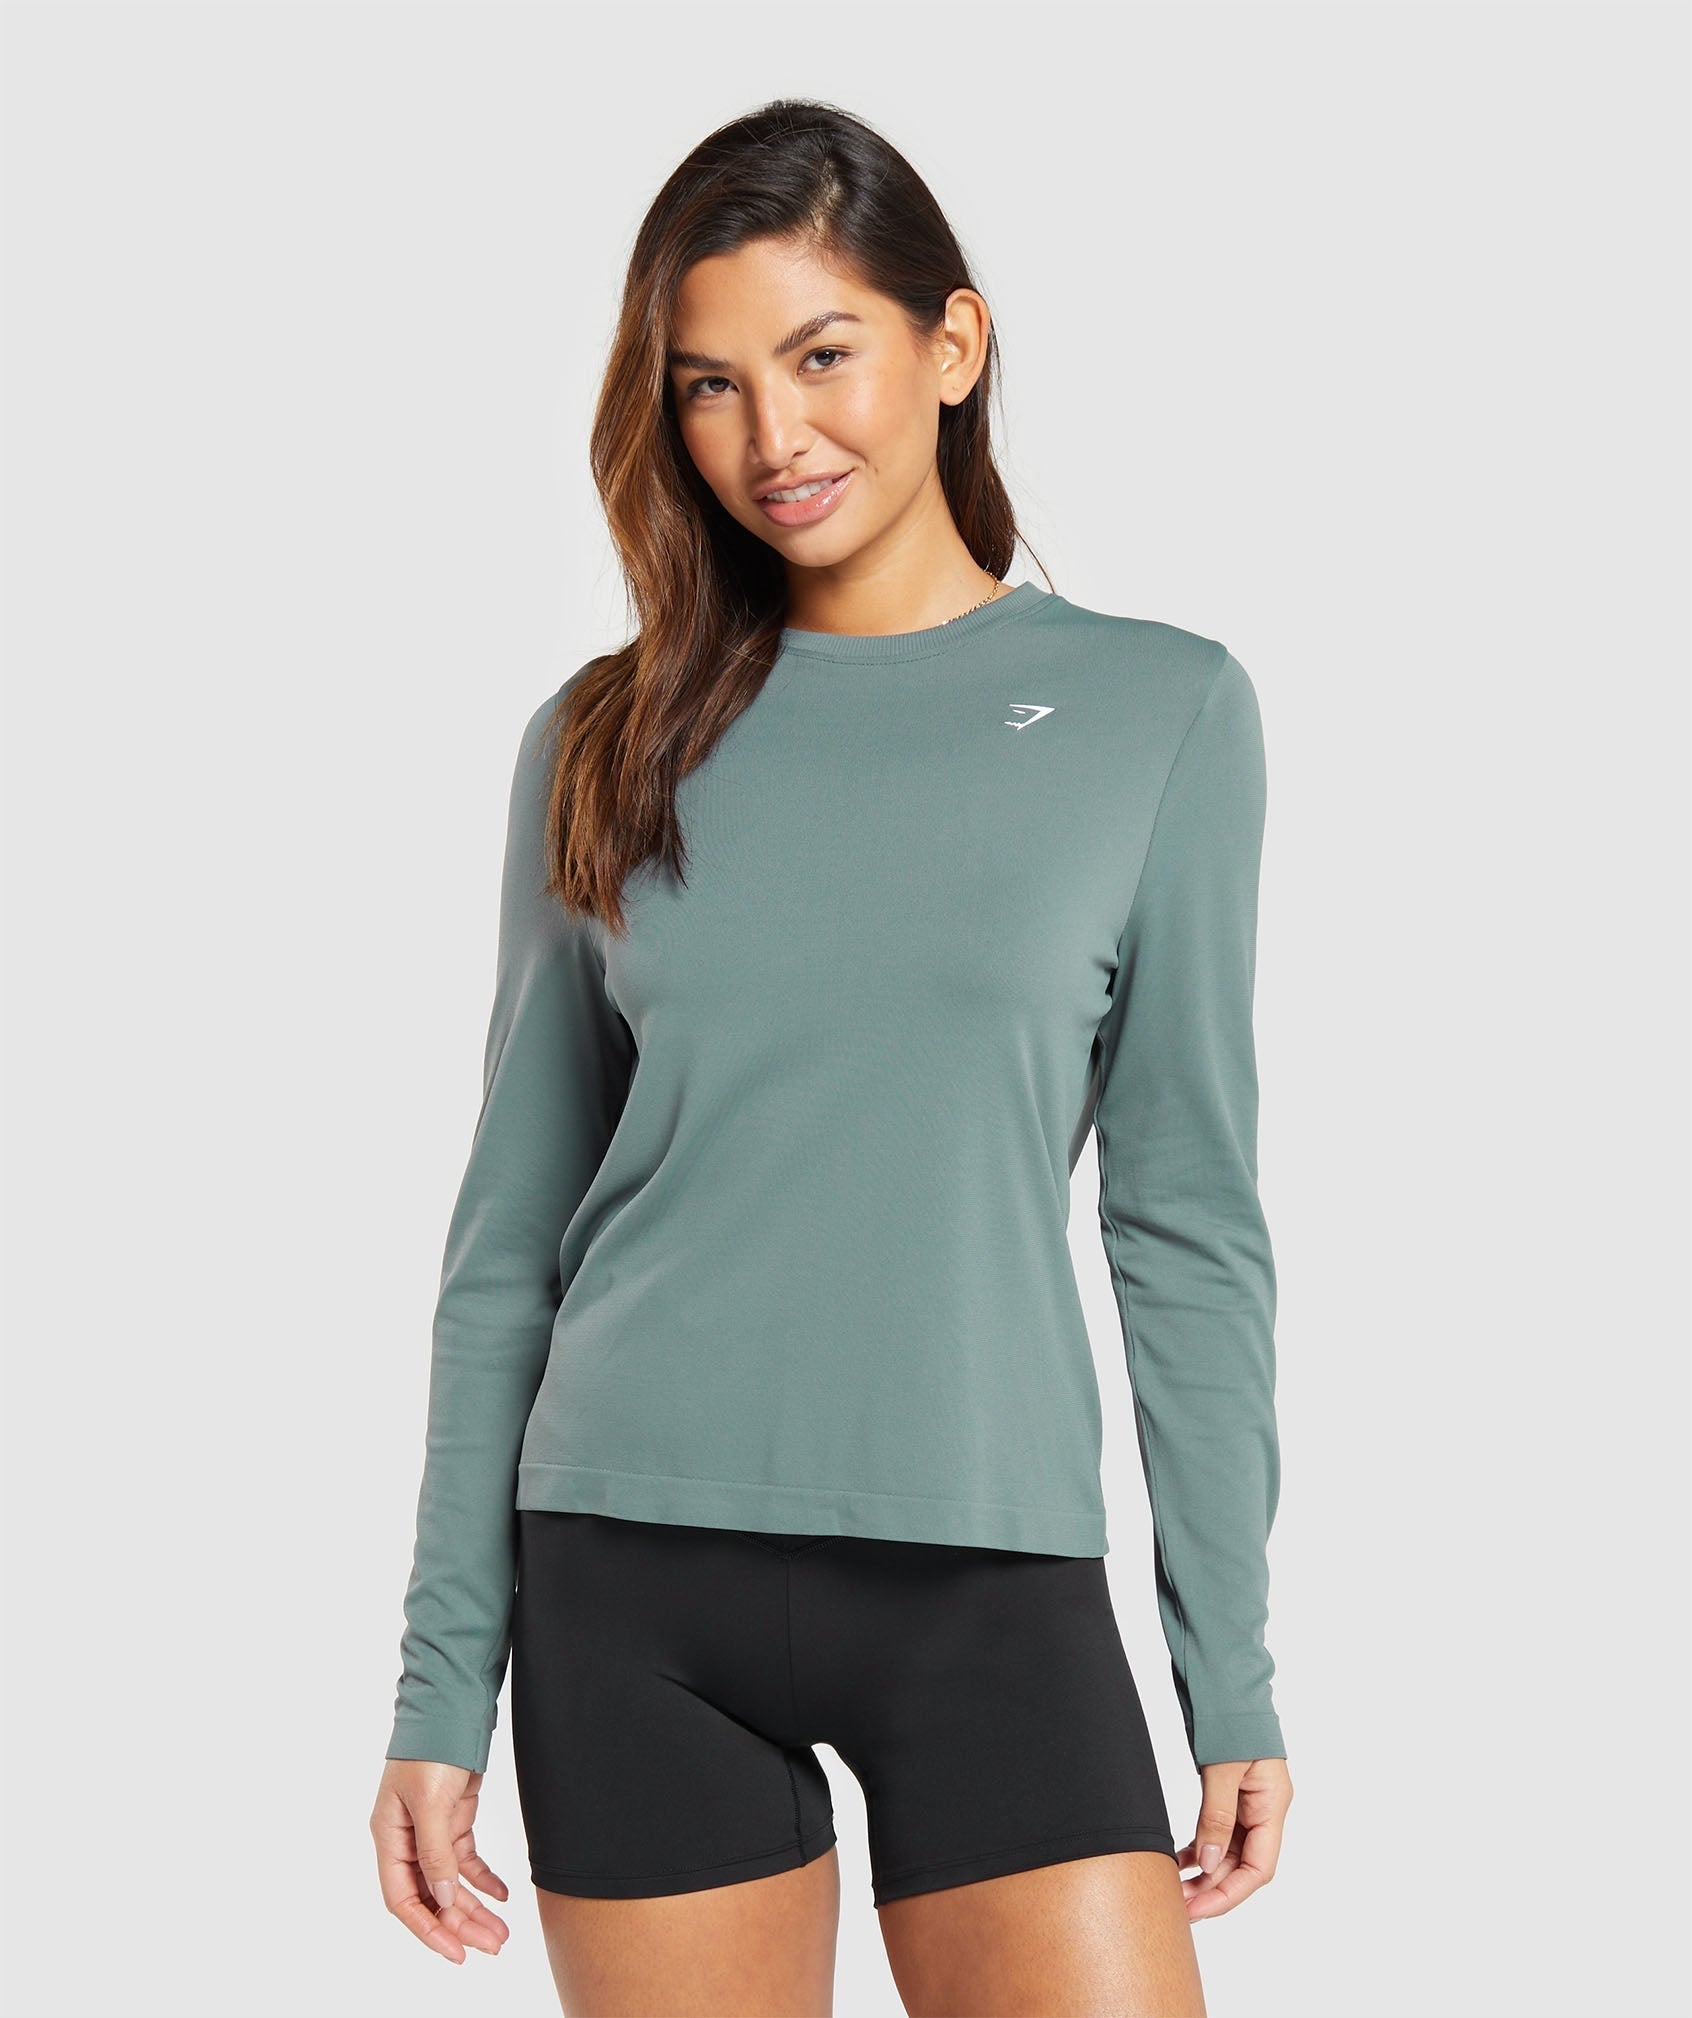 Everyday Seamless Long Sleeve Top in Cargo Teal - view 1